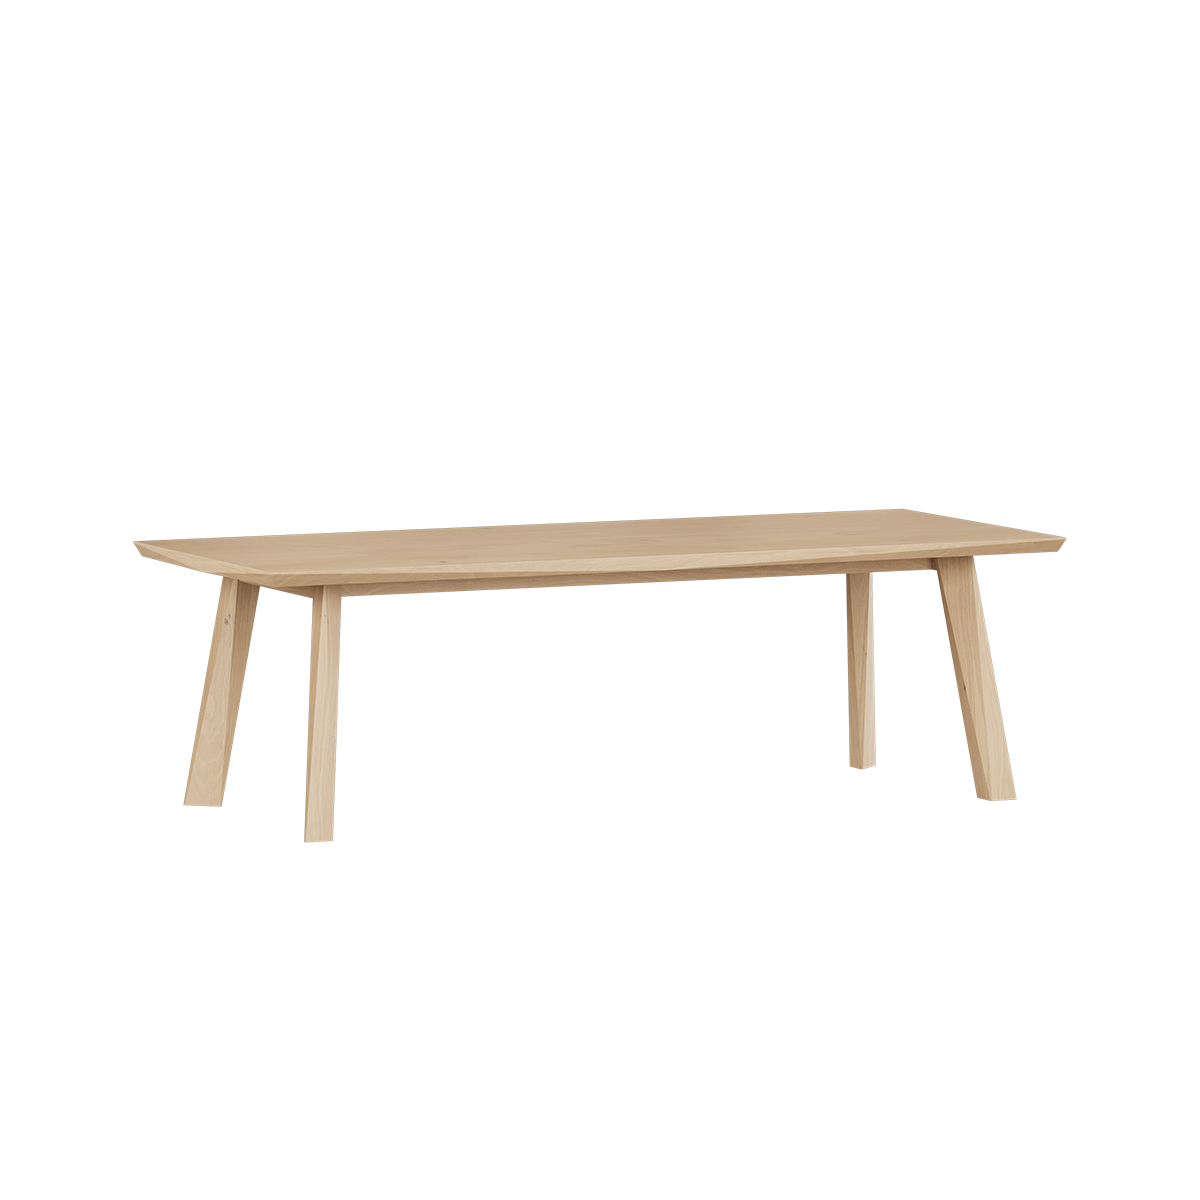 Edge Dining Table - 240x100 cm [Contract]